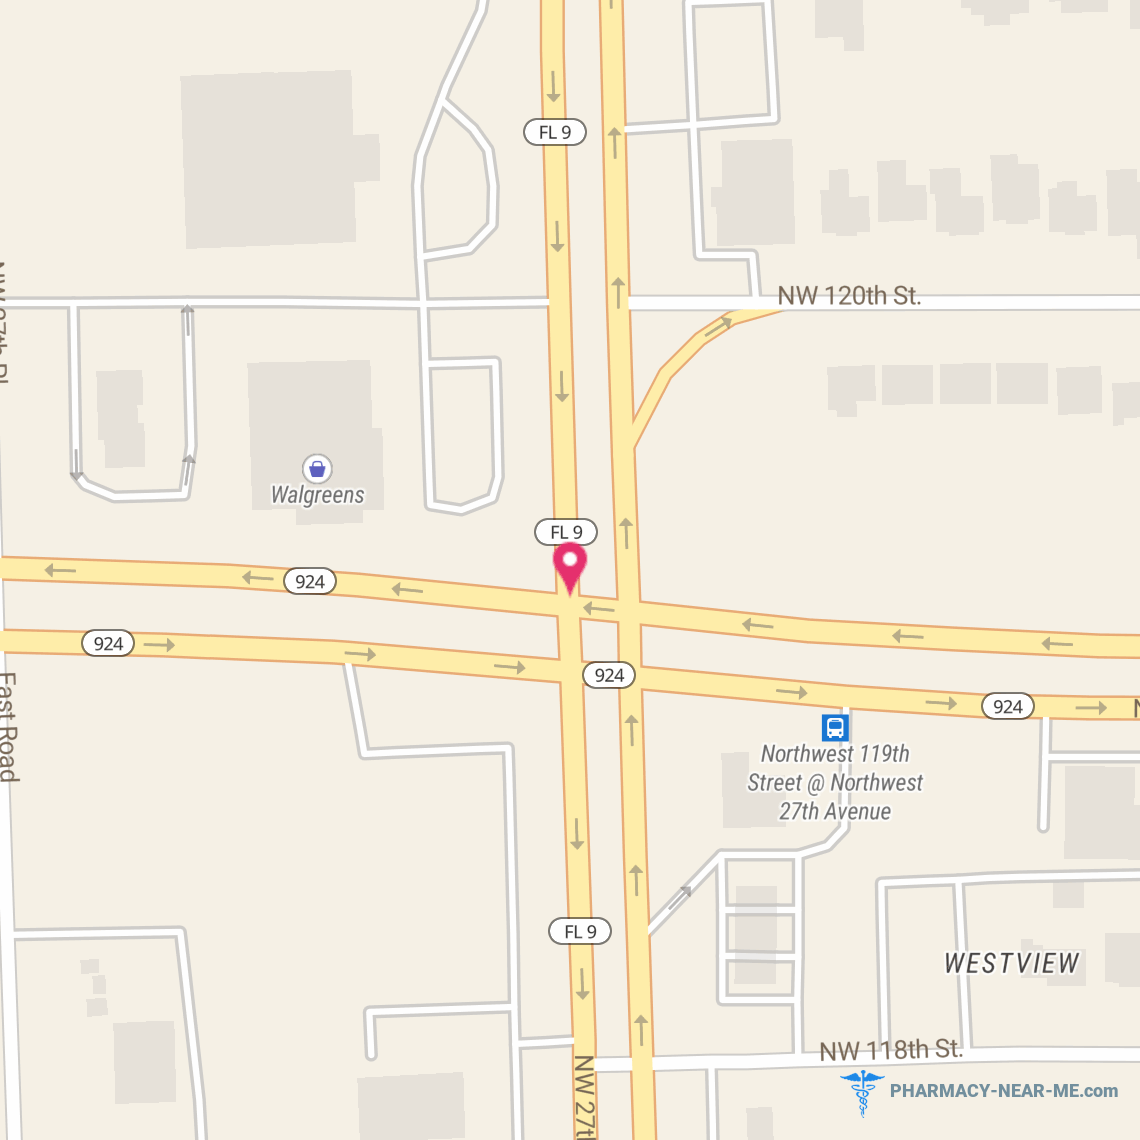 WALGREENS #03105 - Pharmacy Hours, Phone, Reviews & Information: 11920 NW 27th Ave, Westview, Florida 33167, United States